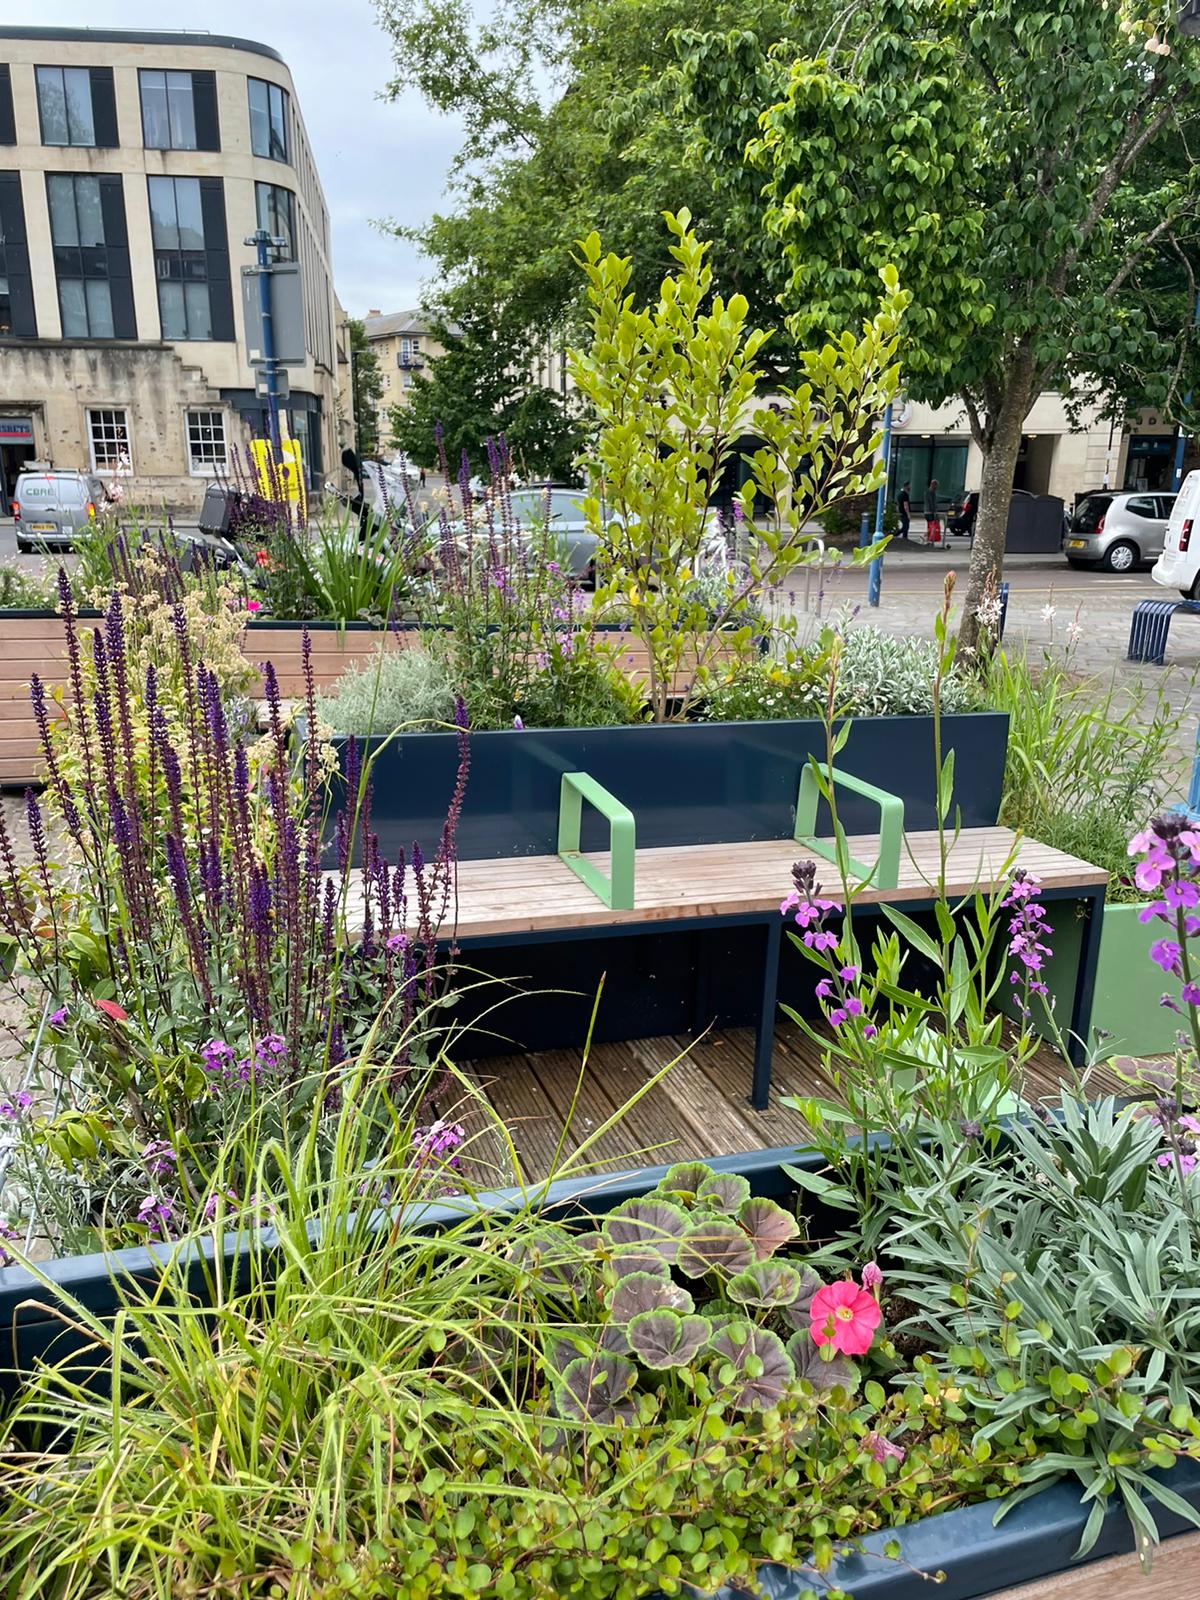 Close up image of a parklet in New Street